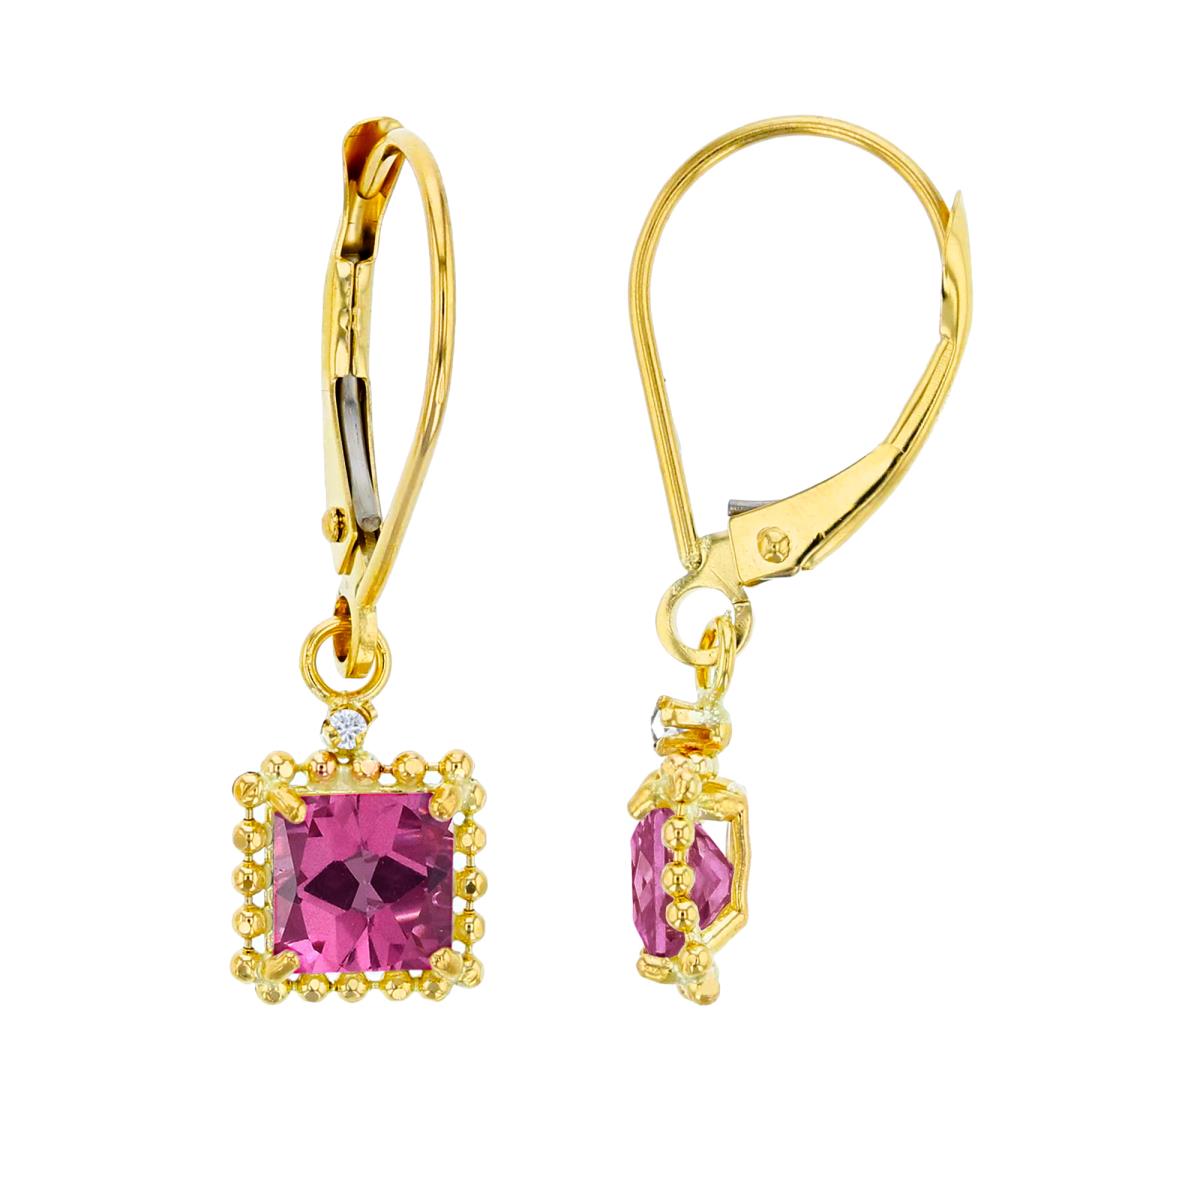 10K Yellow Gold 1.25mm Rd Created White Sapphire & 5mm Sq Pure Pink Bead Frame Drop Lever-Back Earring